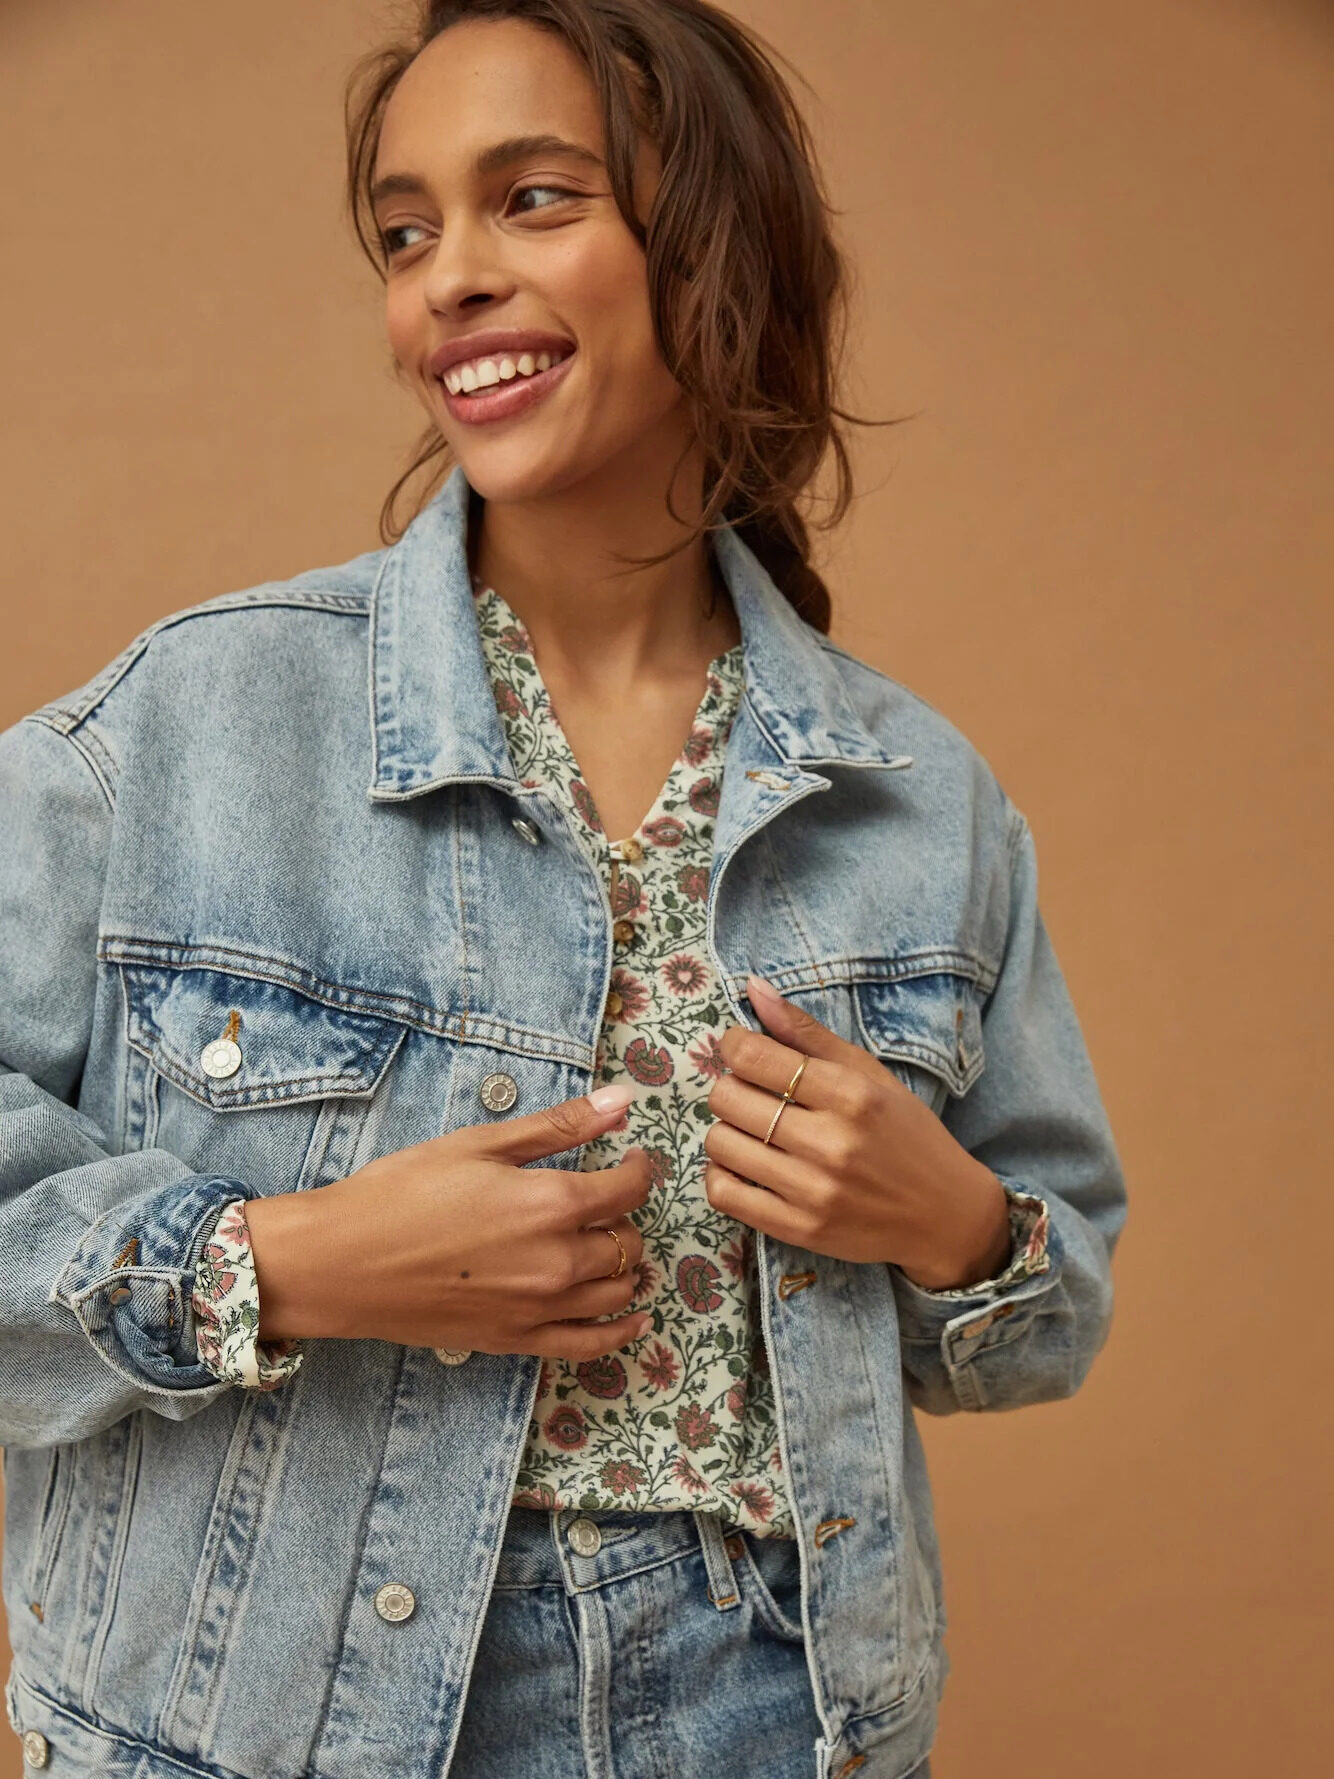 Model wearing AGOLDE Organic Cotton Denim Jacket with a floral shirt underneath and smiling behind them